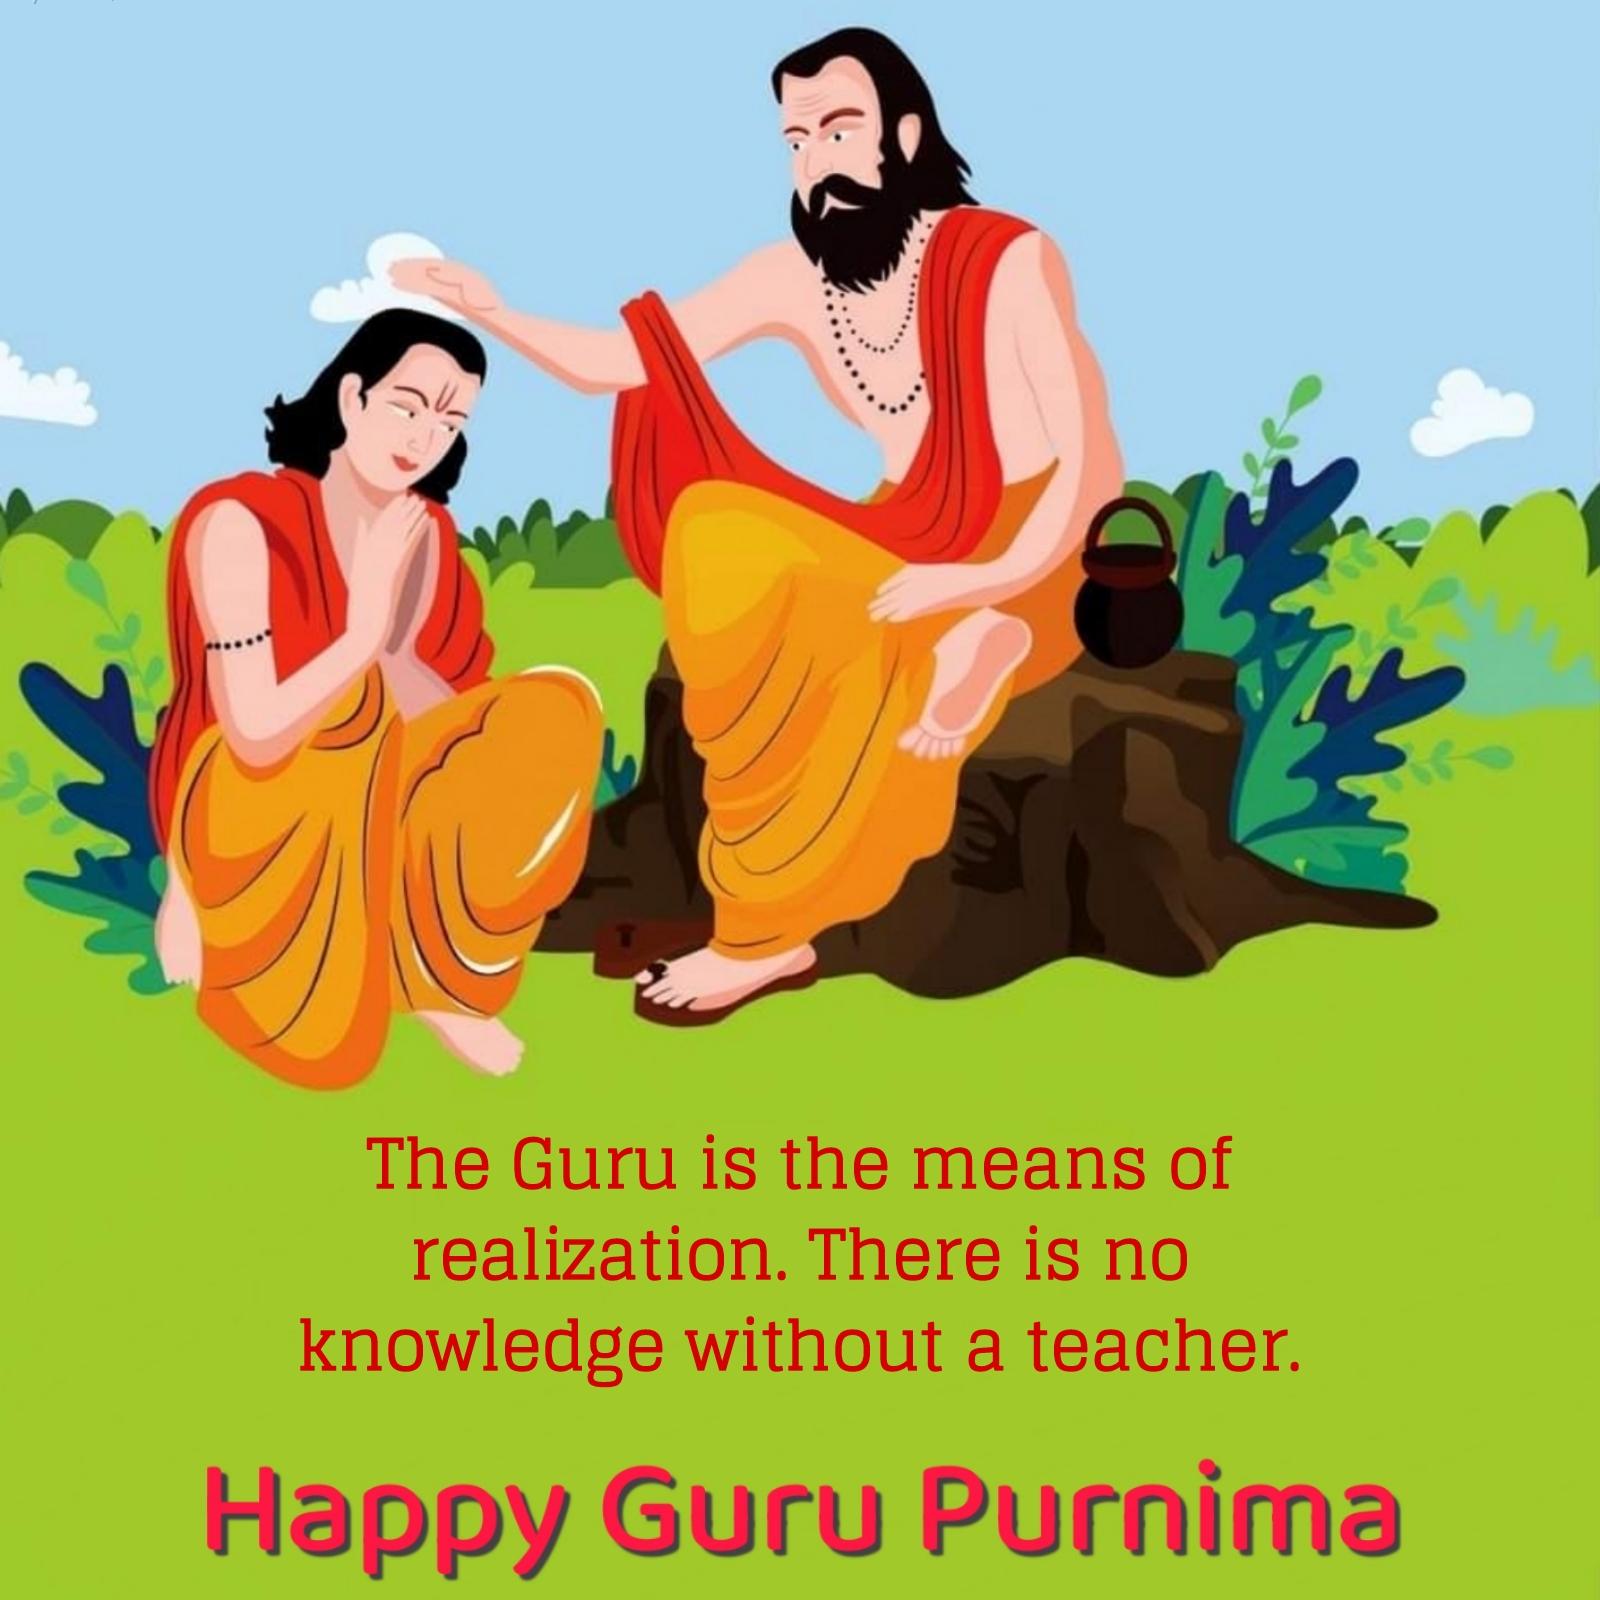 The Guru is the means of realization There is no knowledge without a teacher